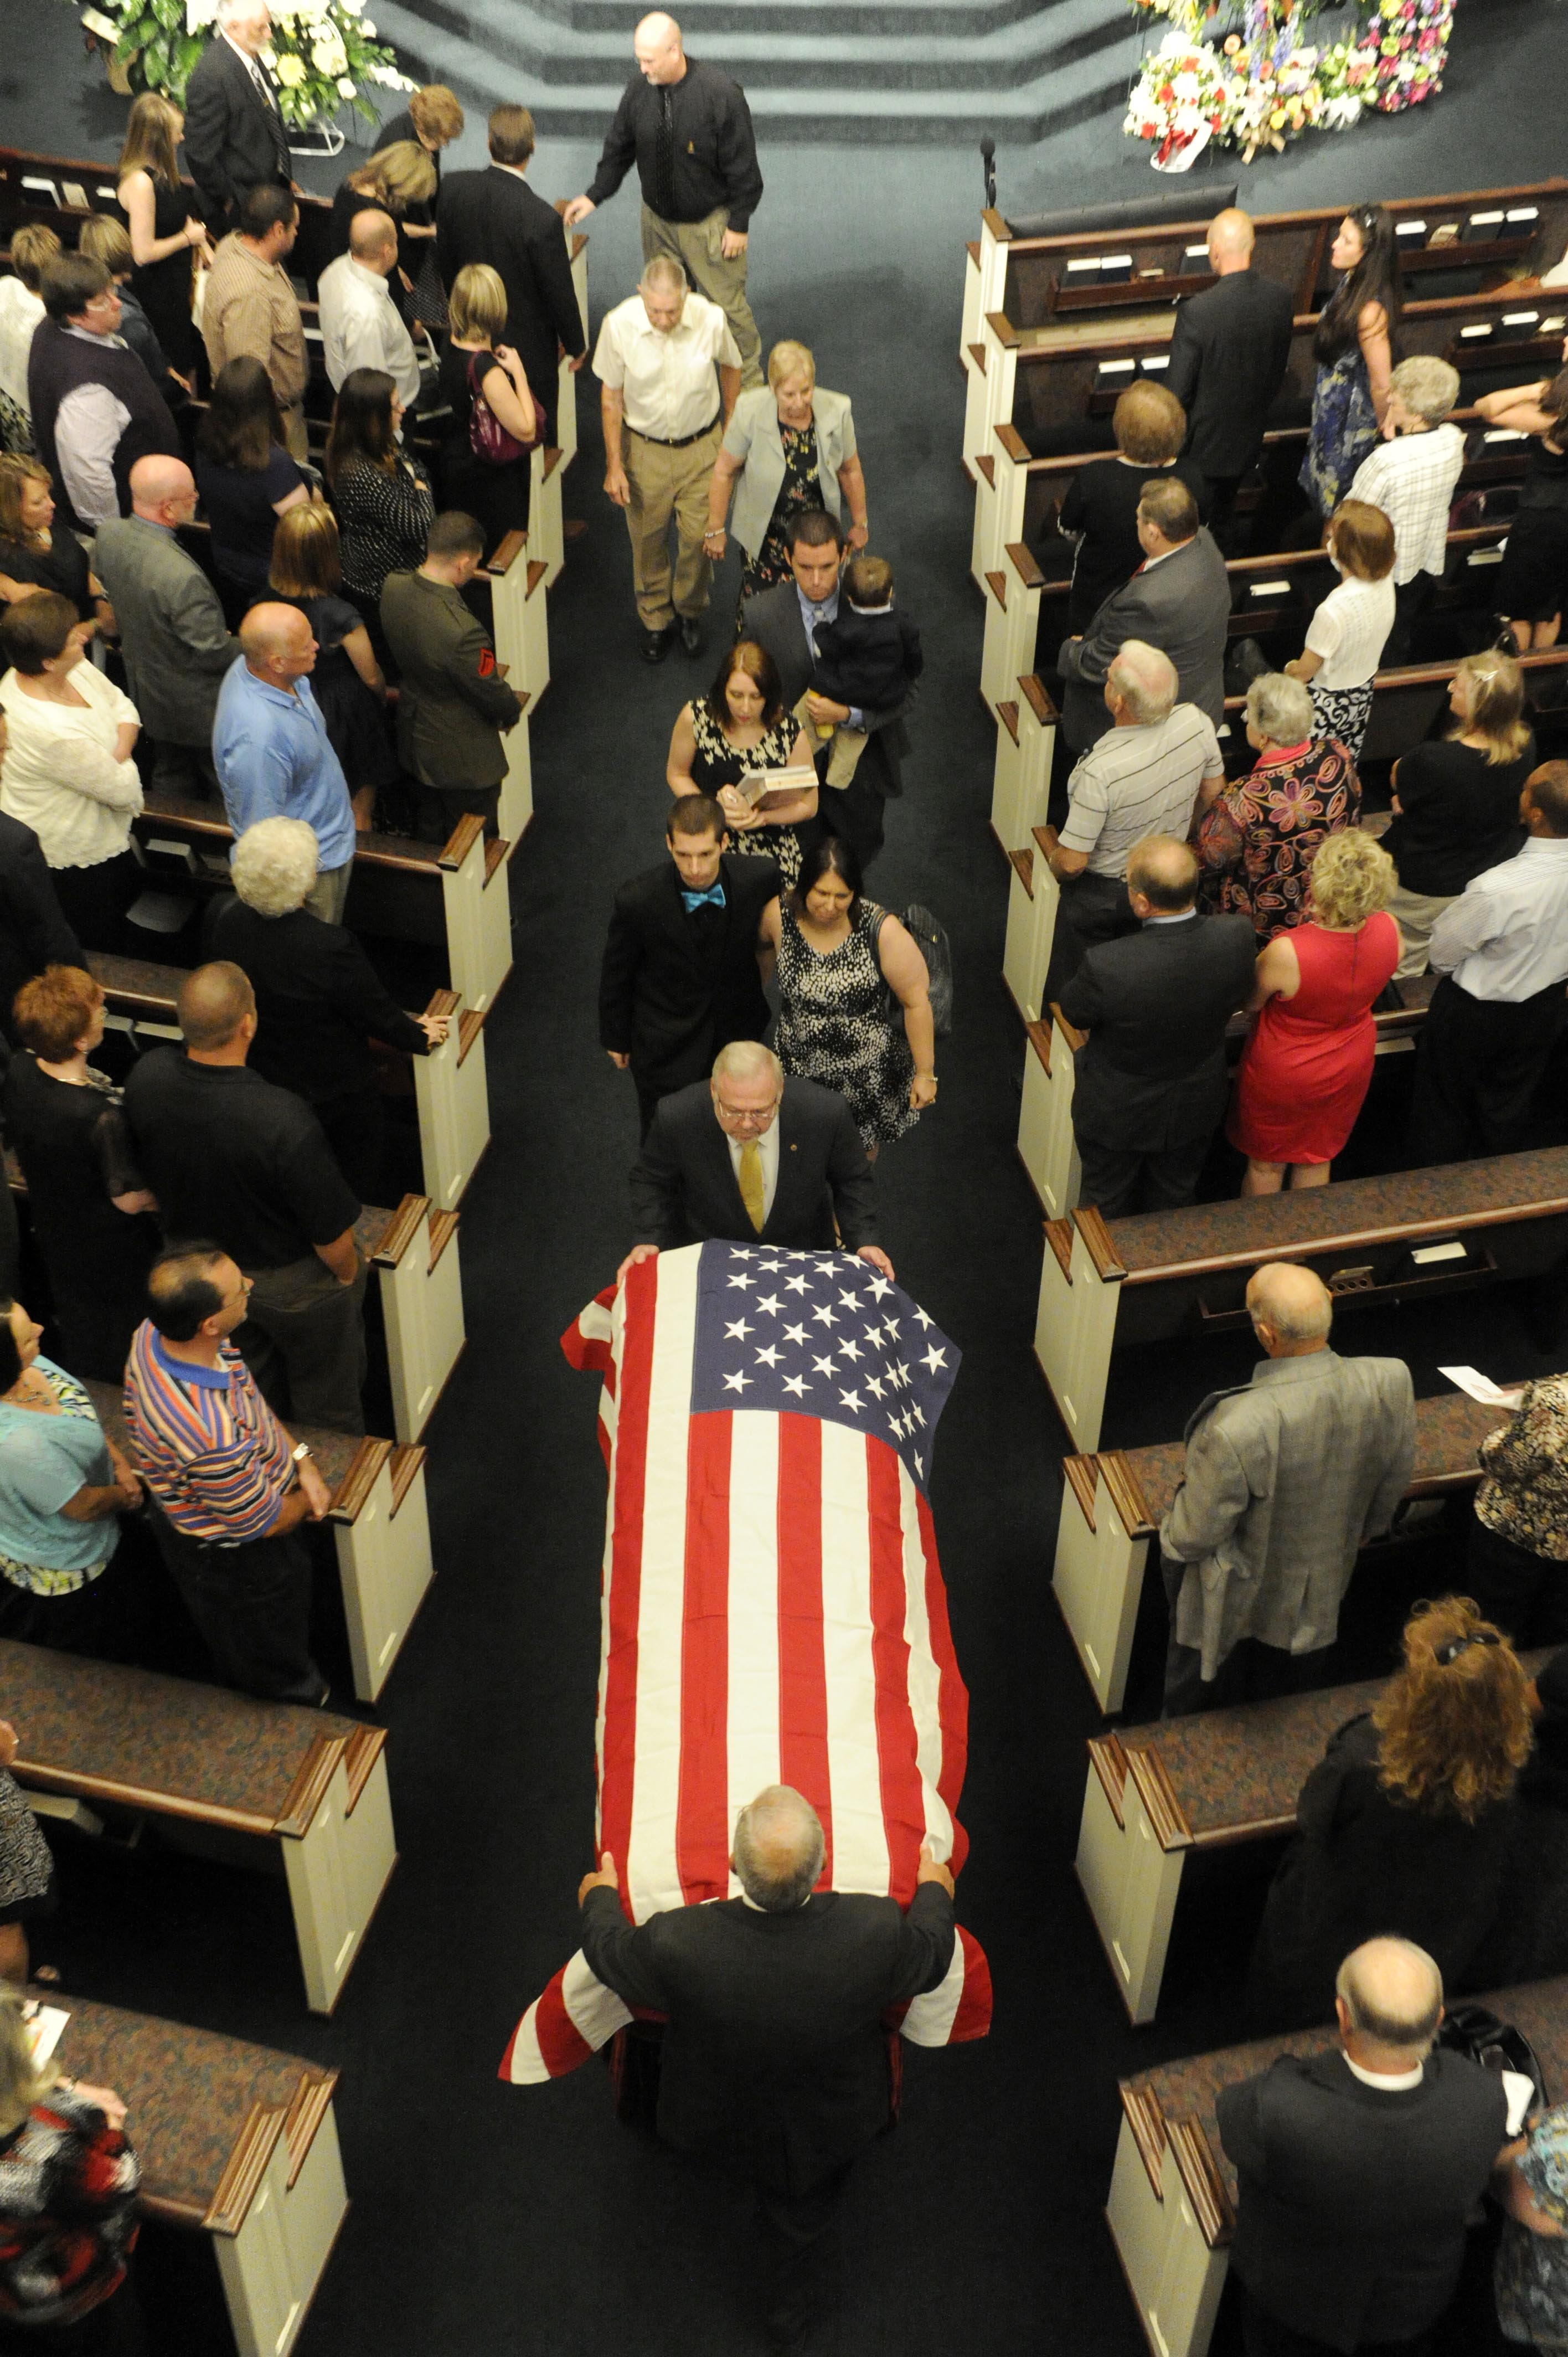 Firefighter David Robinson's Funeral